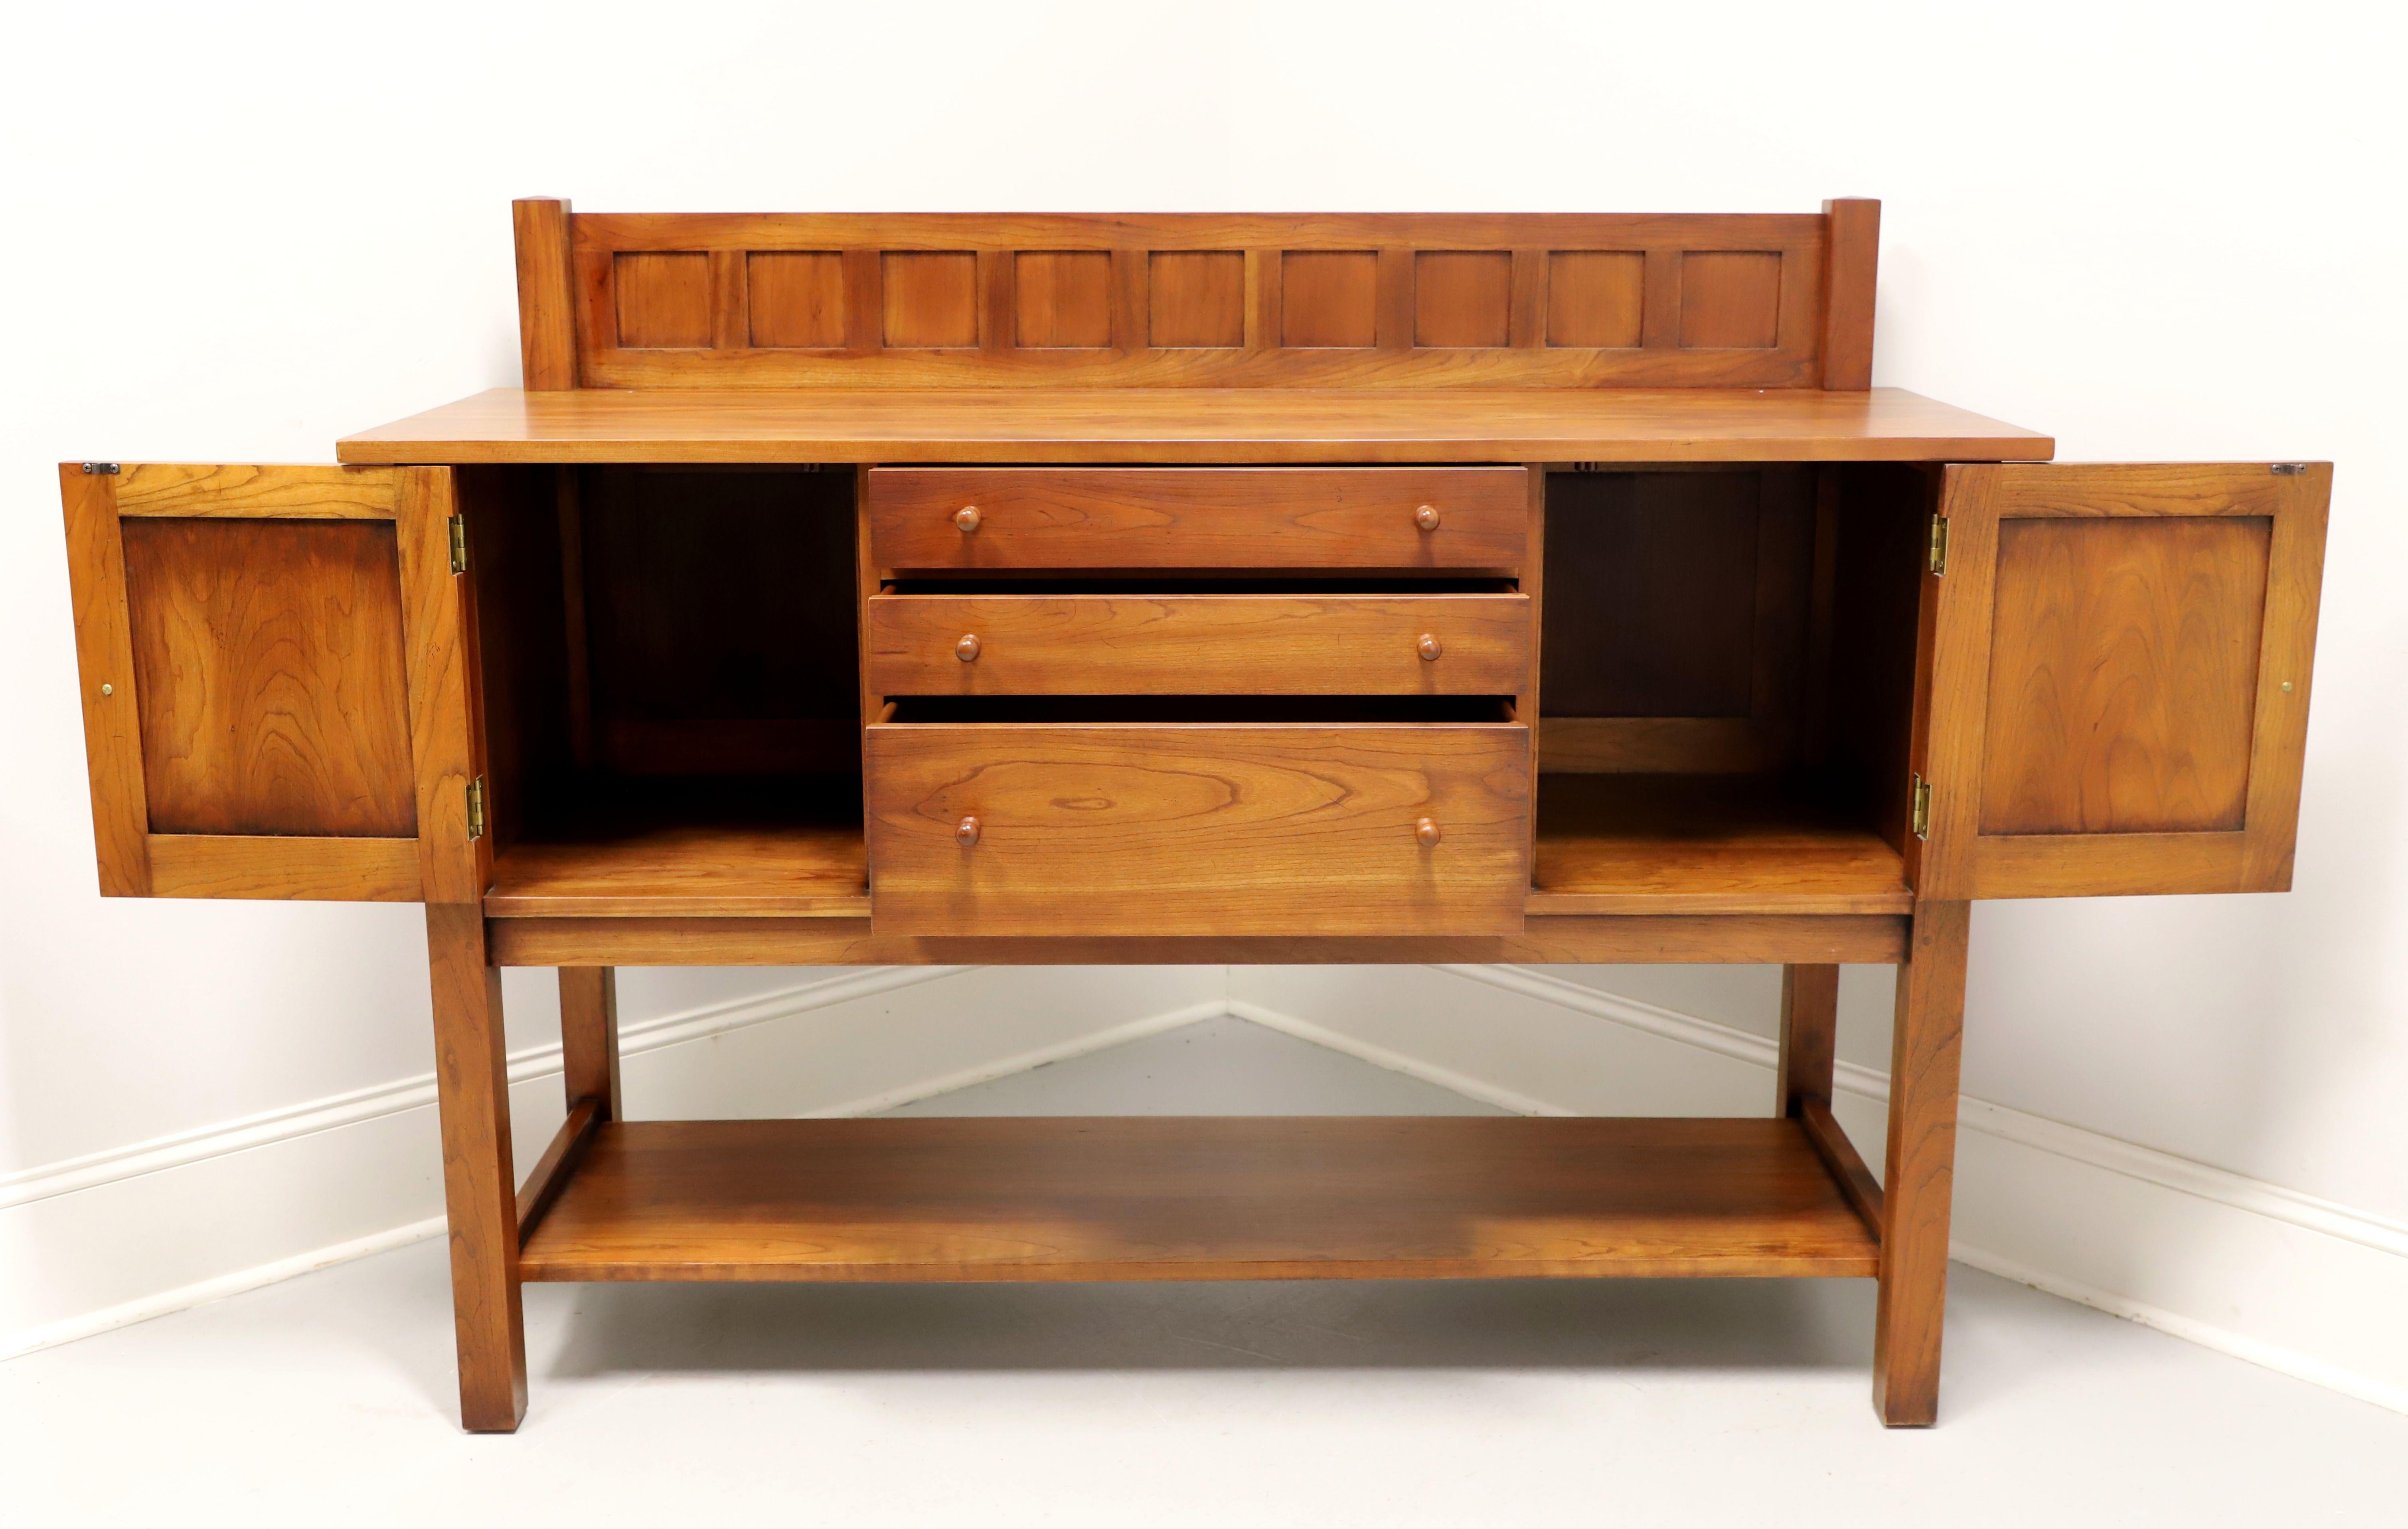 20th Century STICKLEY Mission Cherry Sideboard 91-711